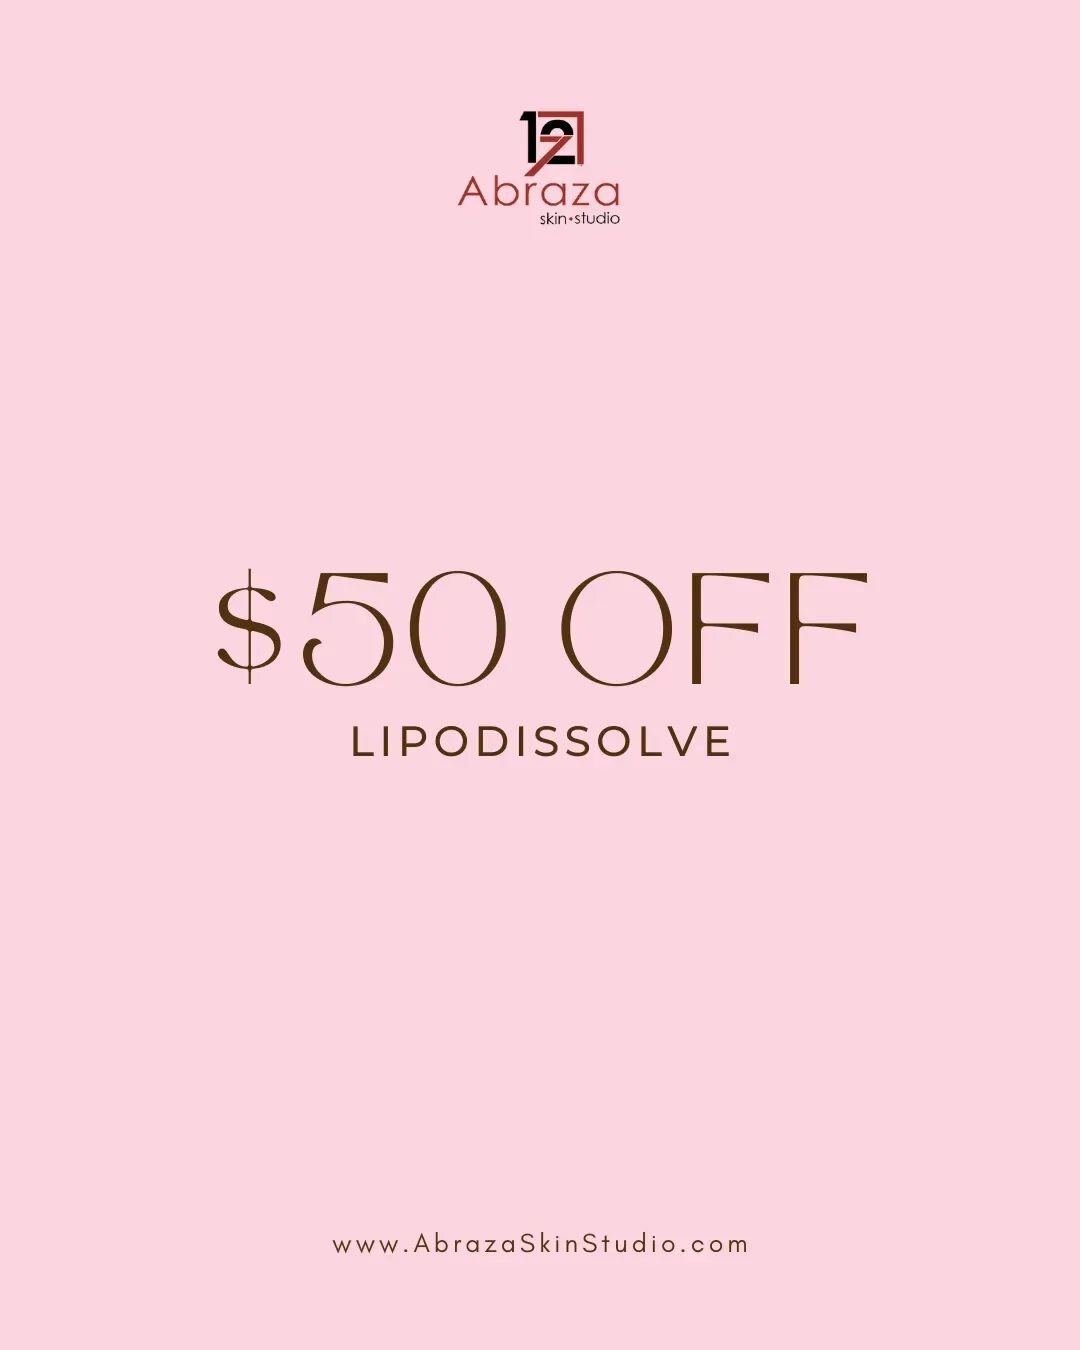 It's the perfect opportunity to achieve the body shape you've always desired with $50 OFF!

Why choose Lipodissolve?
✅ Non-surgical body contouring technique
✅ Minimally invasive with little to no downtime
✅ Target and dissolve localized fat deposits